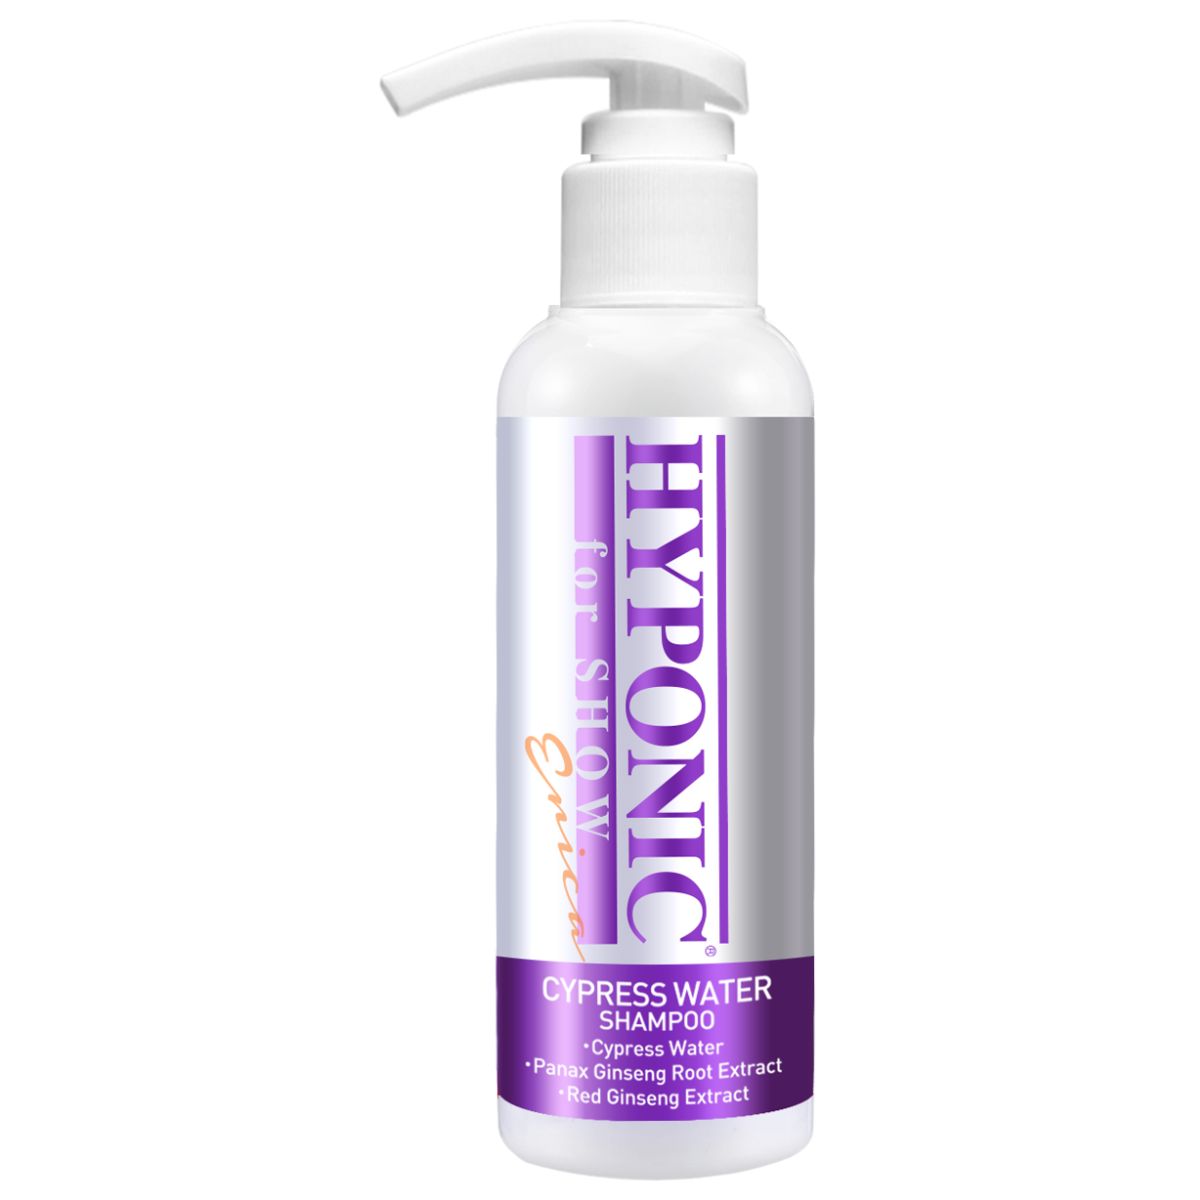 Hyponic for Show, Cypress Water Shampoo